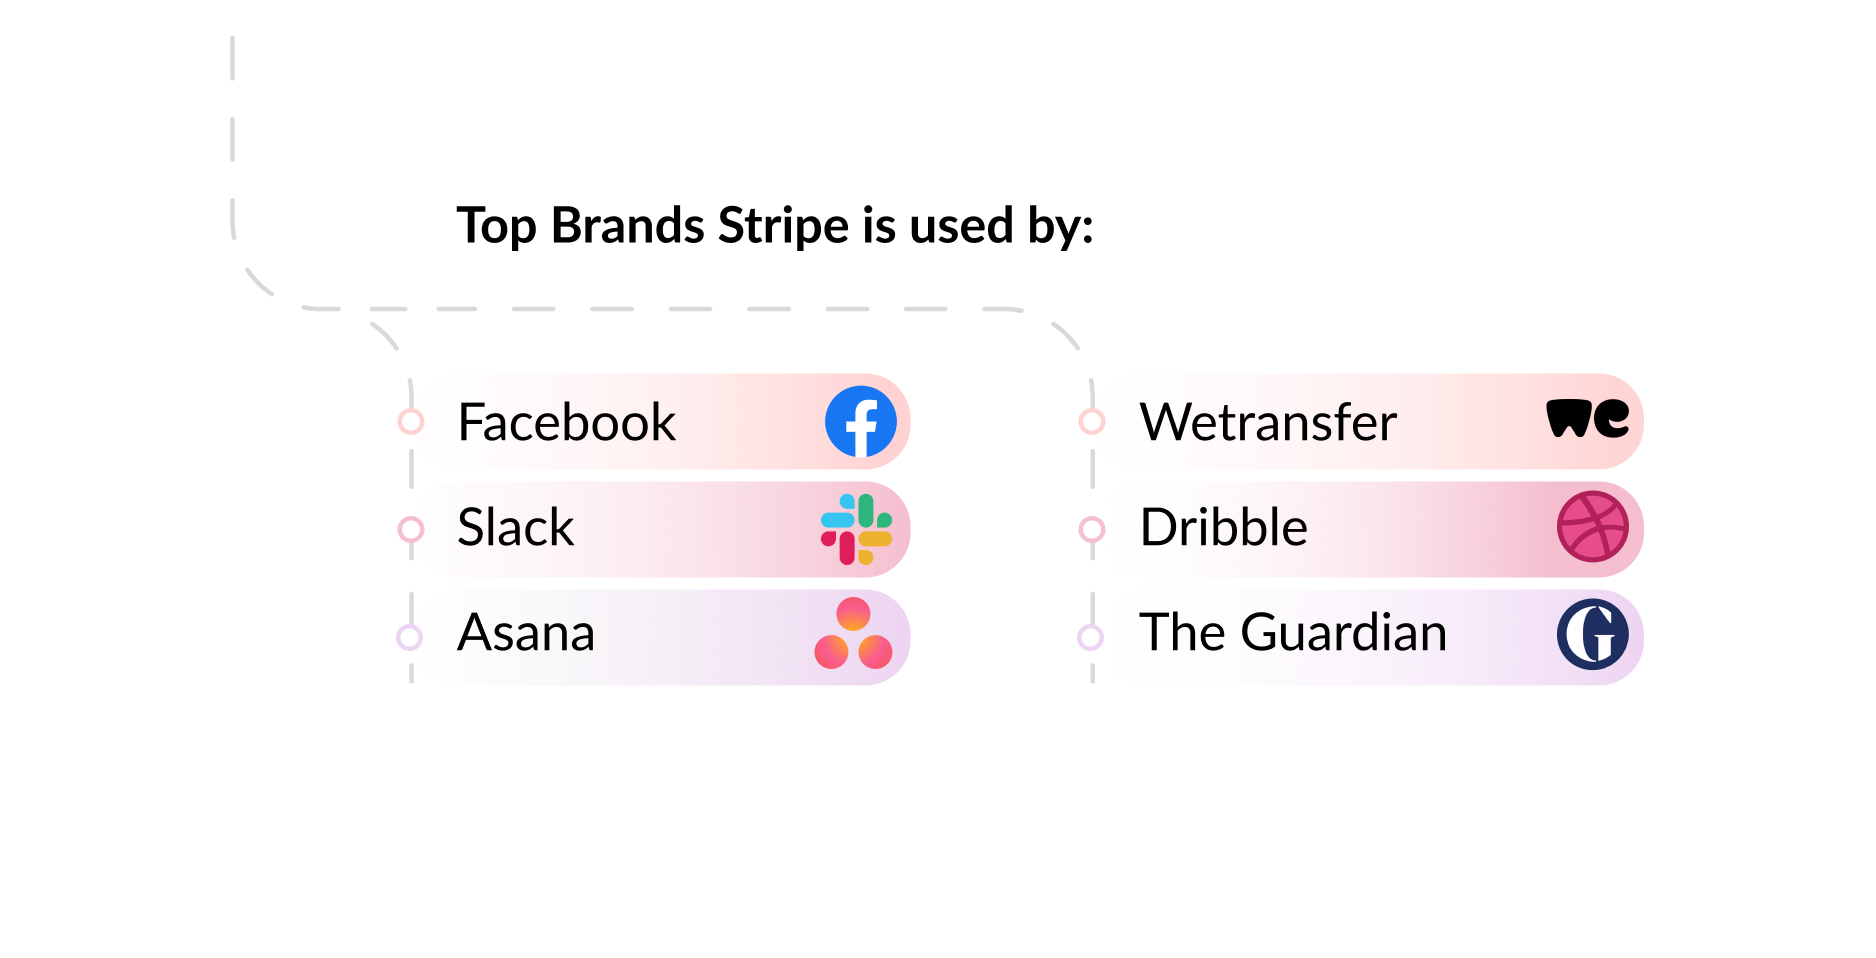 Top Brands Stripe is used by